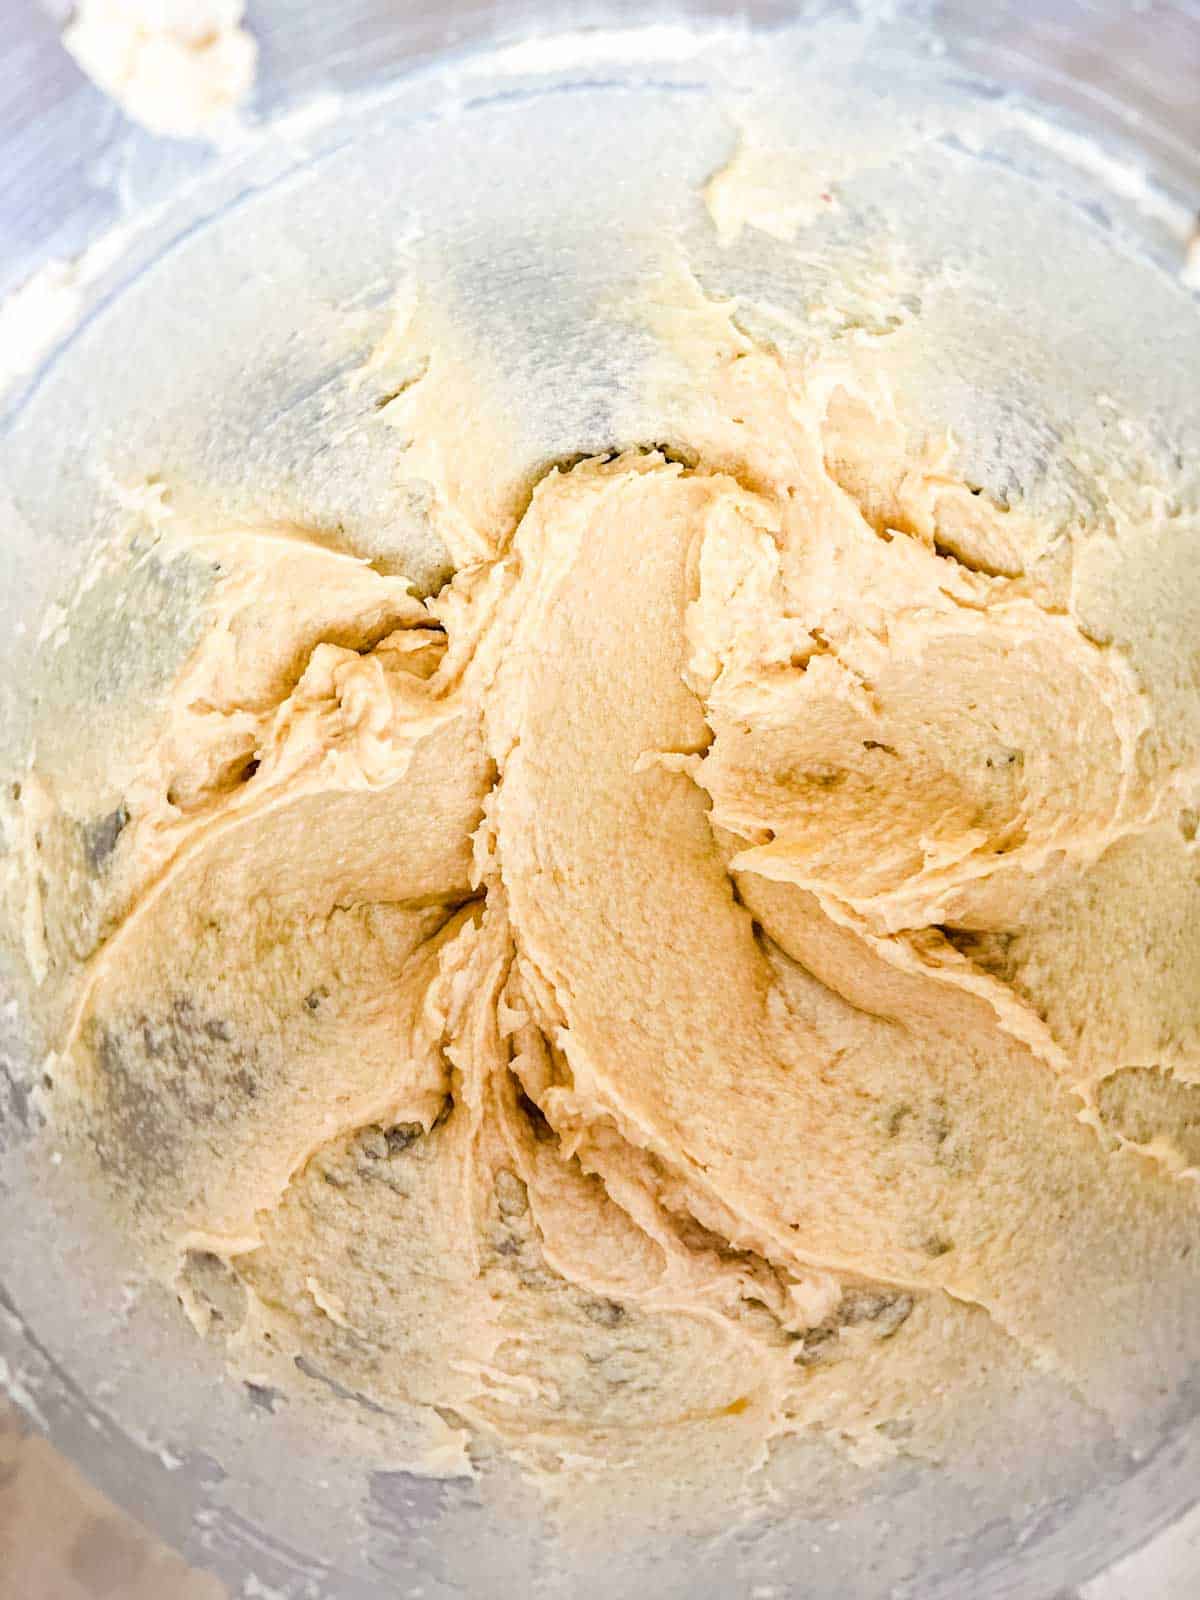 Creamed butter and sugar that has had egg and vanilla incorporated.